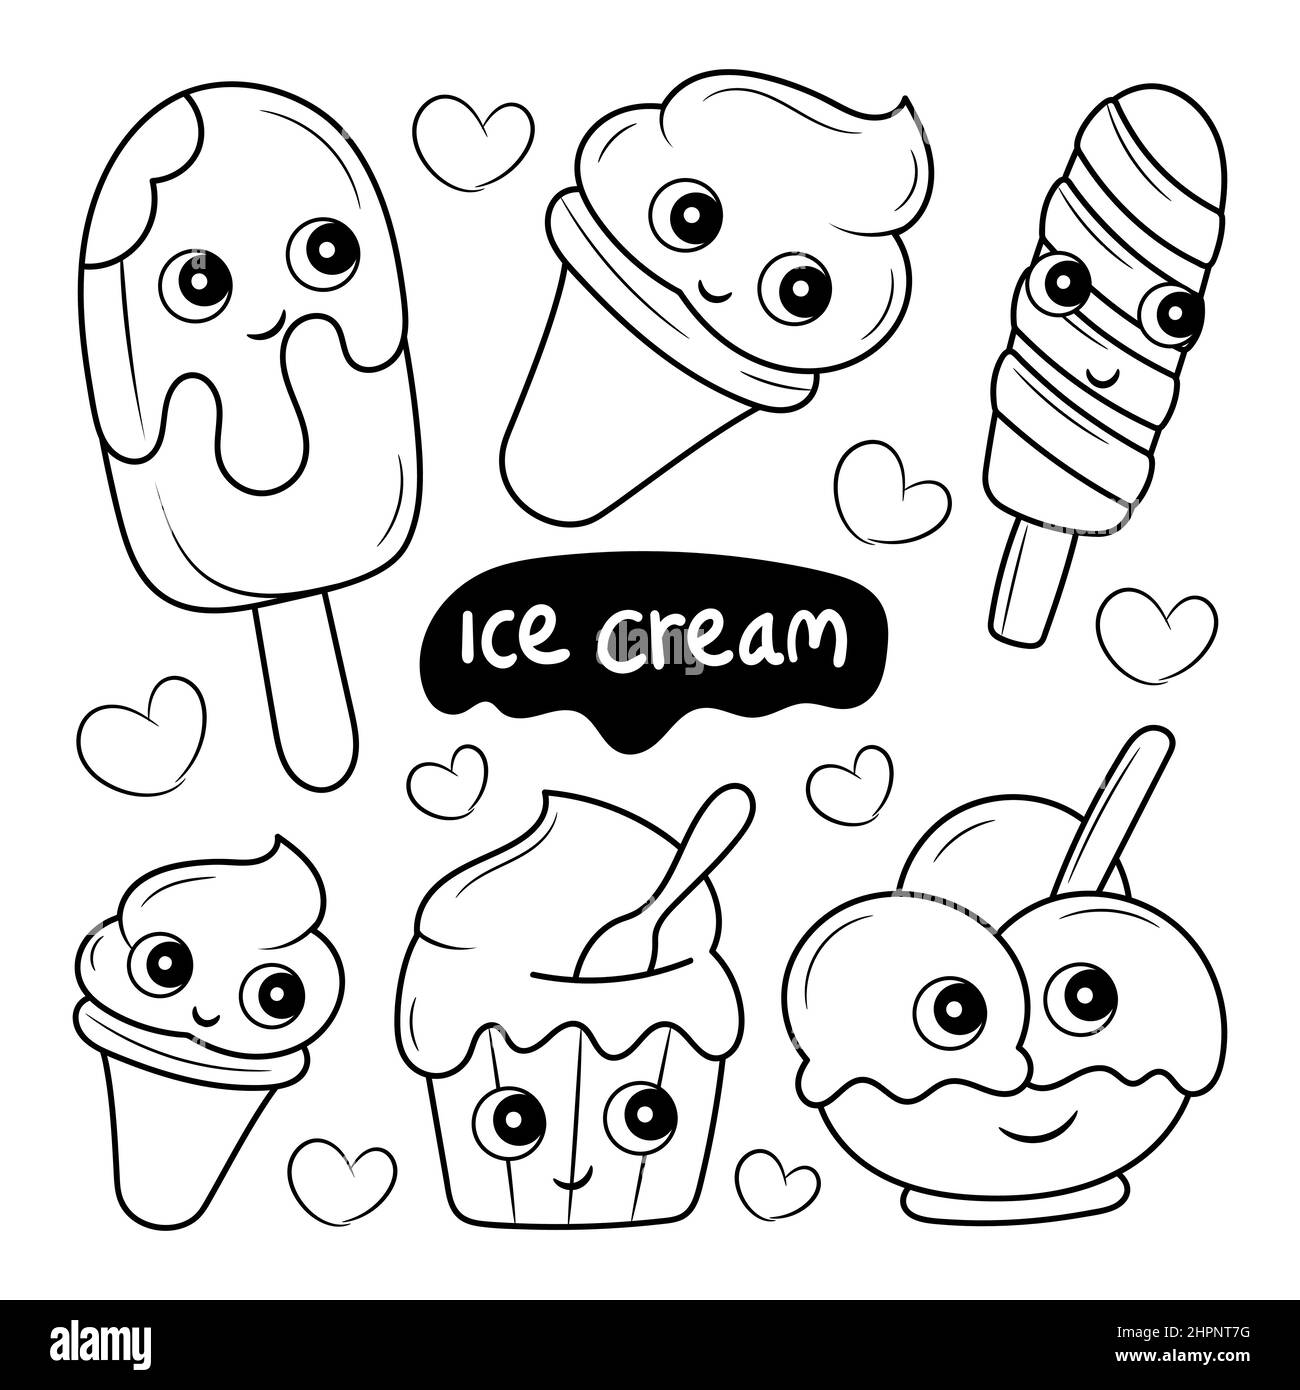 Simple ice cream with hand drawn doodle element collections Stock Vector